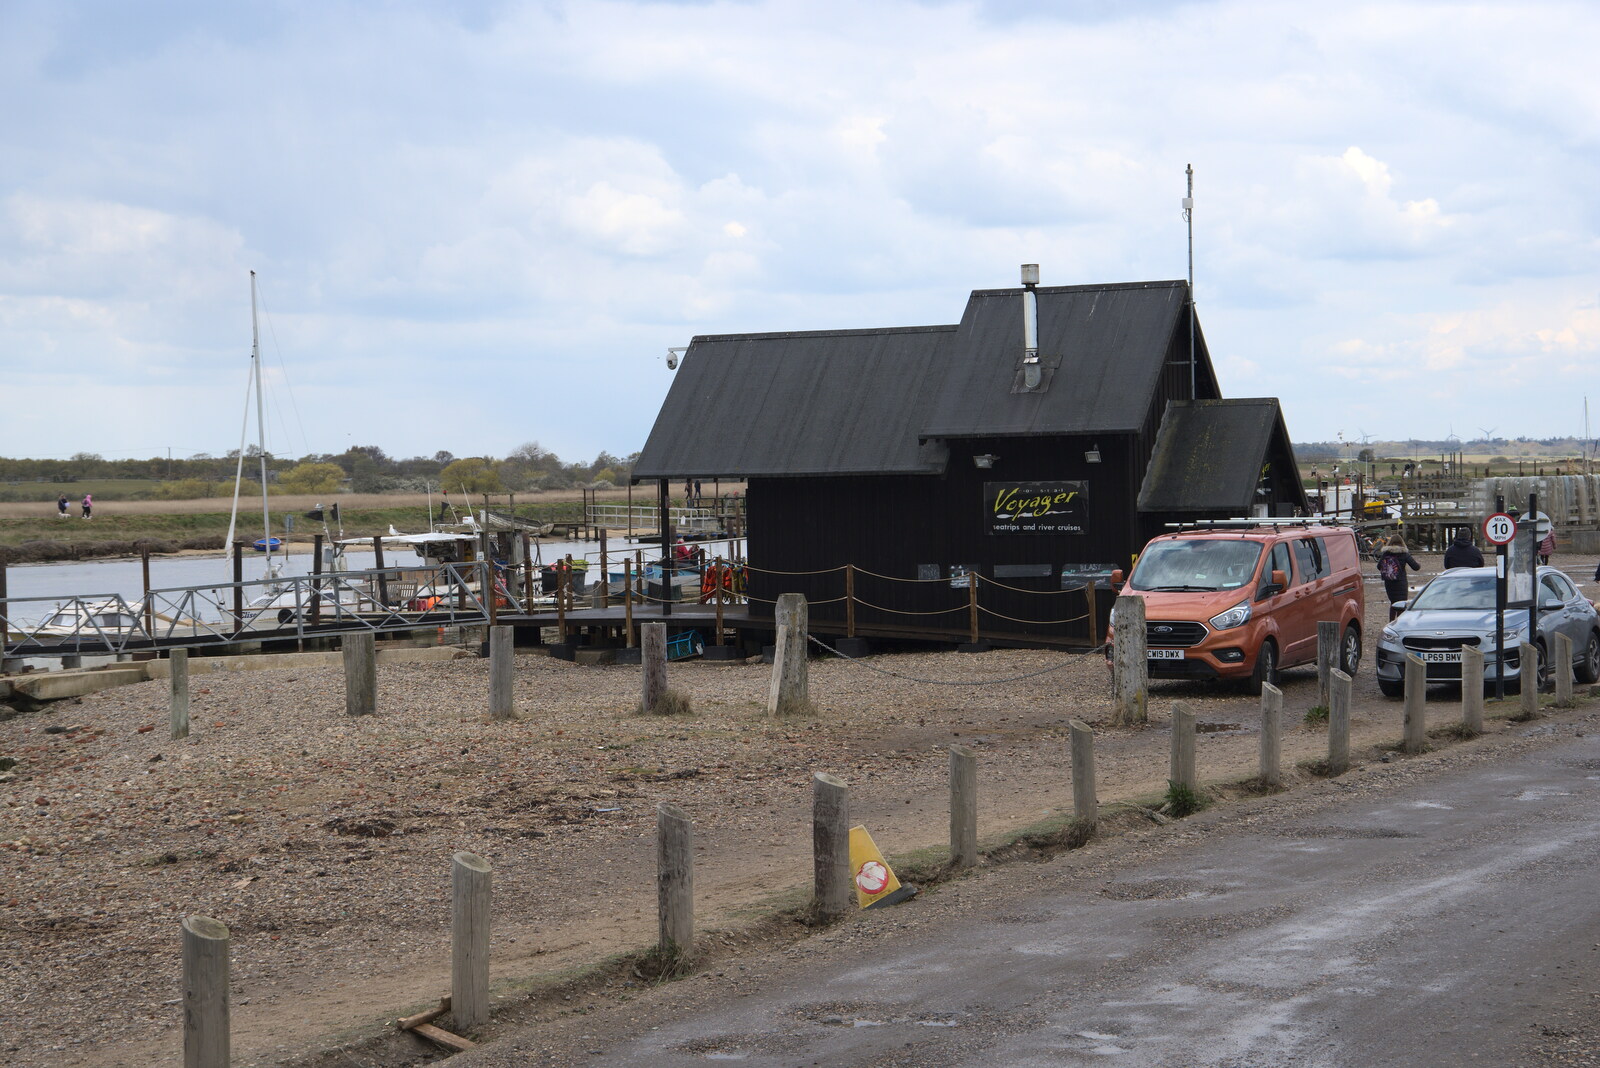 Voyager's black hut on Blackshore from A Chilly Trip to the Beach, Southwold Harbour, Suffolk - 2nd May 2021